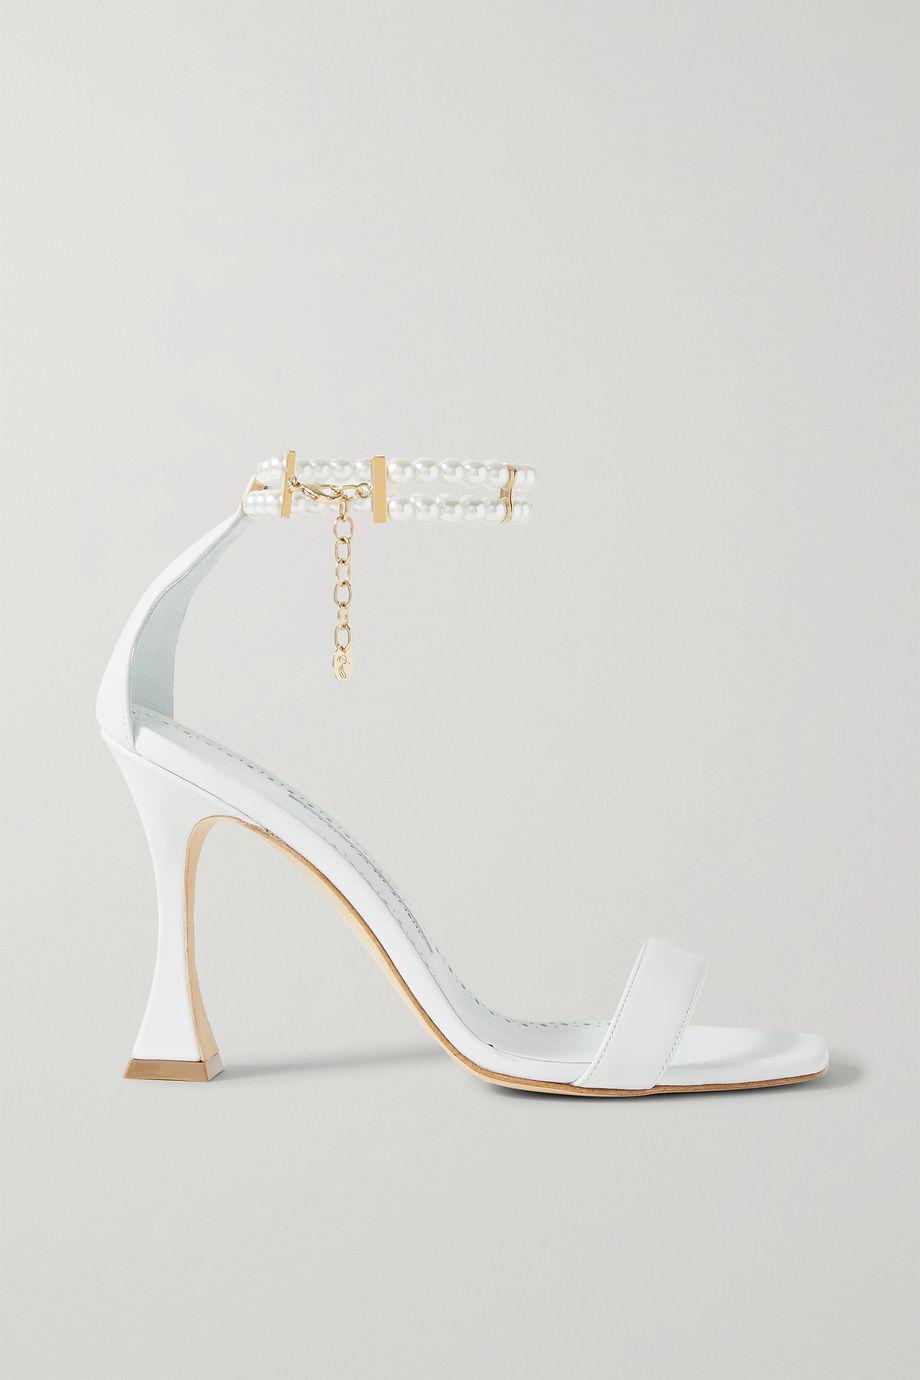 Charona 105 embellished leather sandals by MANOLO BLAHNIK